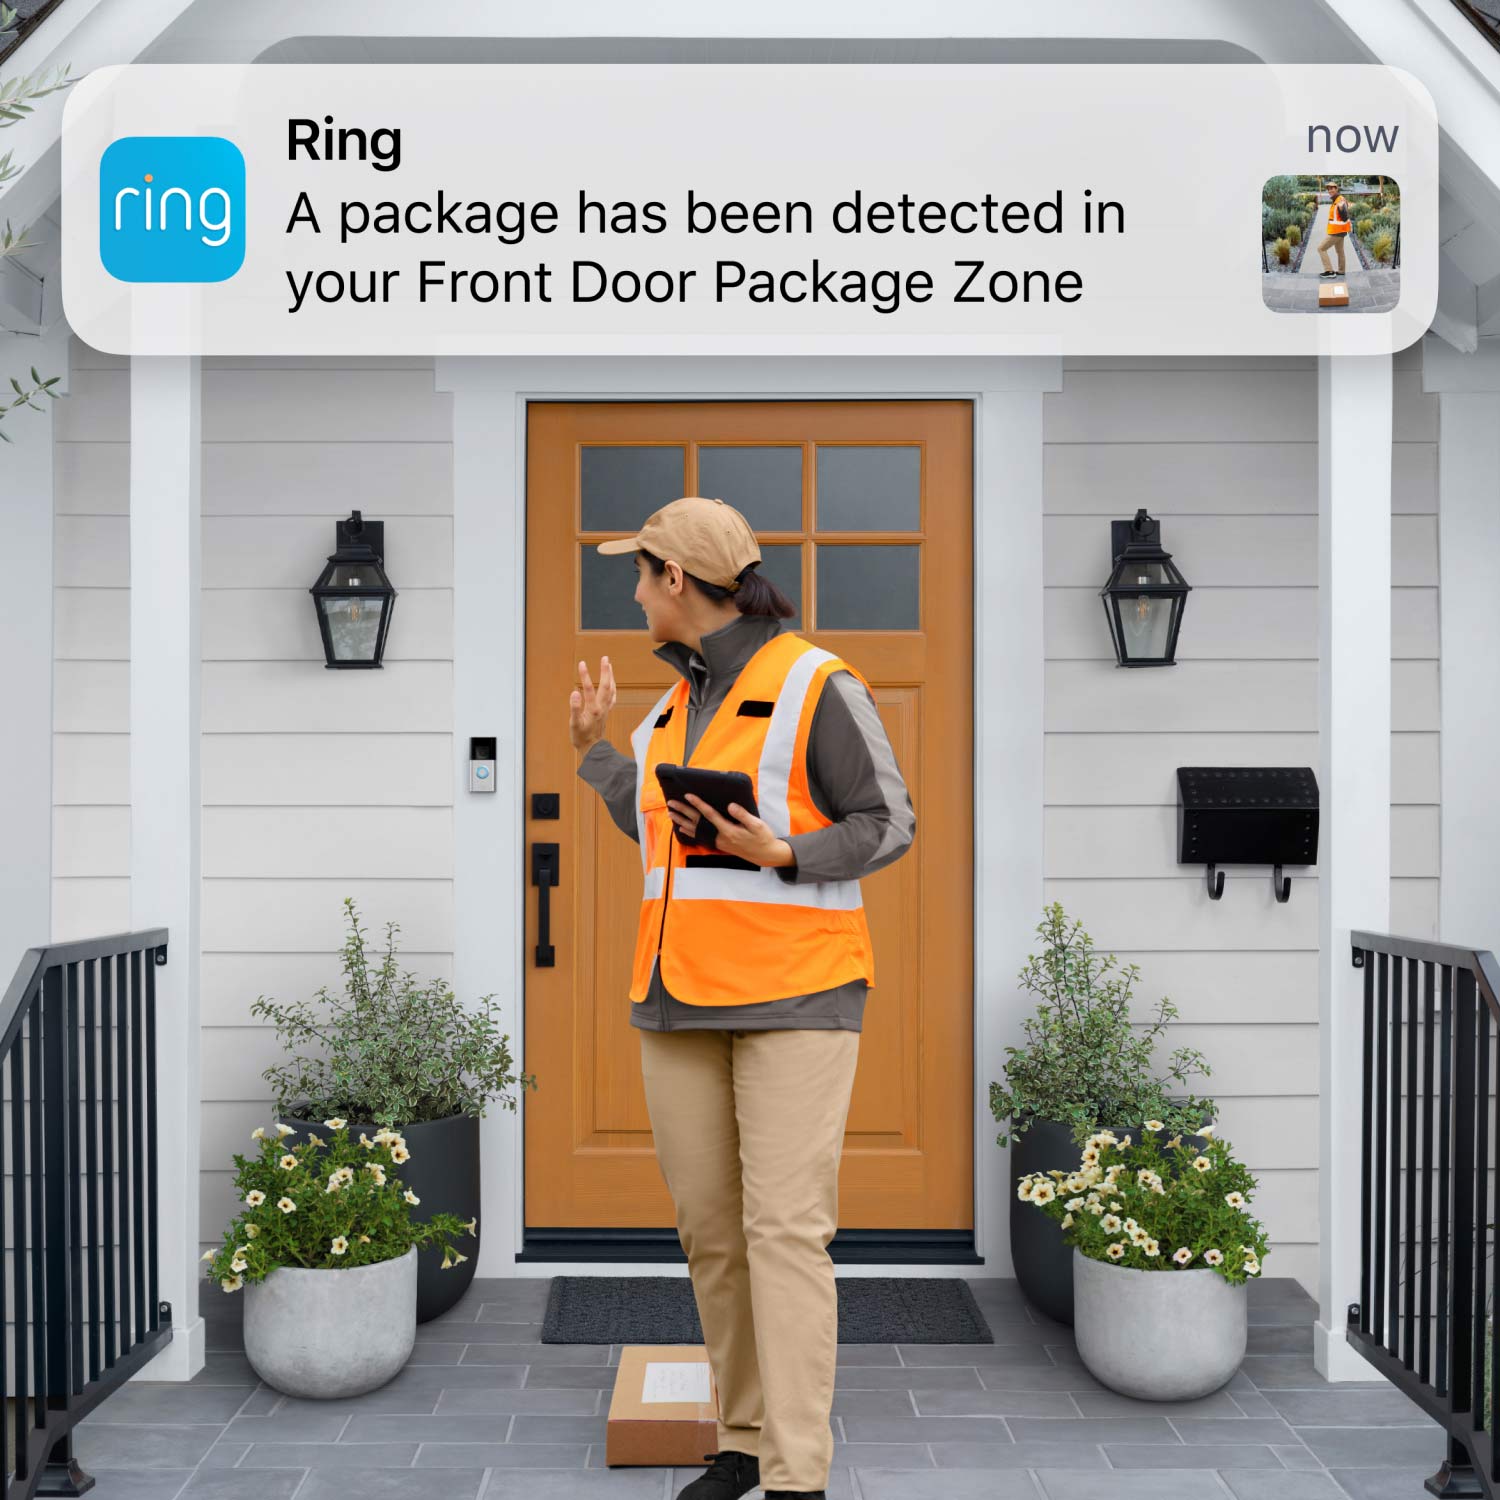 Battery Doorbell Plus (Video Doorbell) (for Certified Refurbished) - Person waving at doorbell camera after package delivery. Notification reads: 